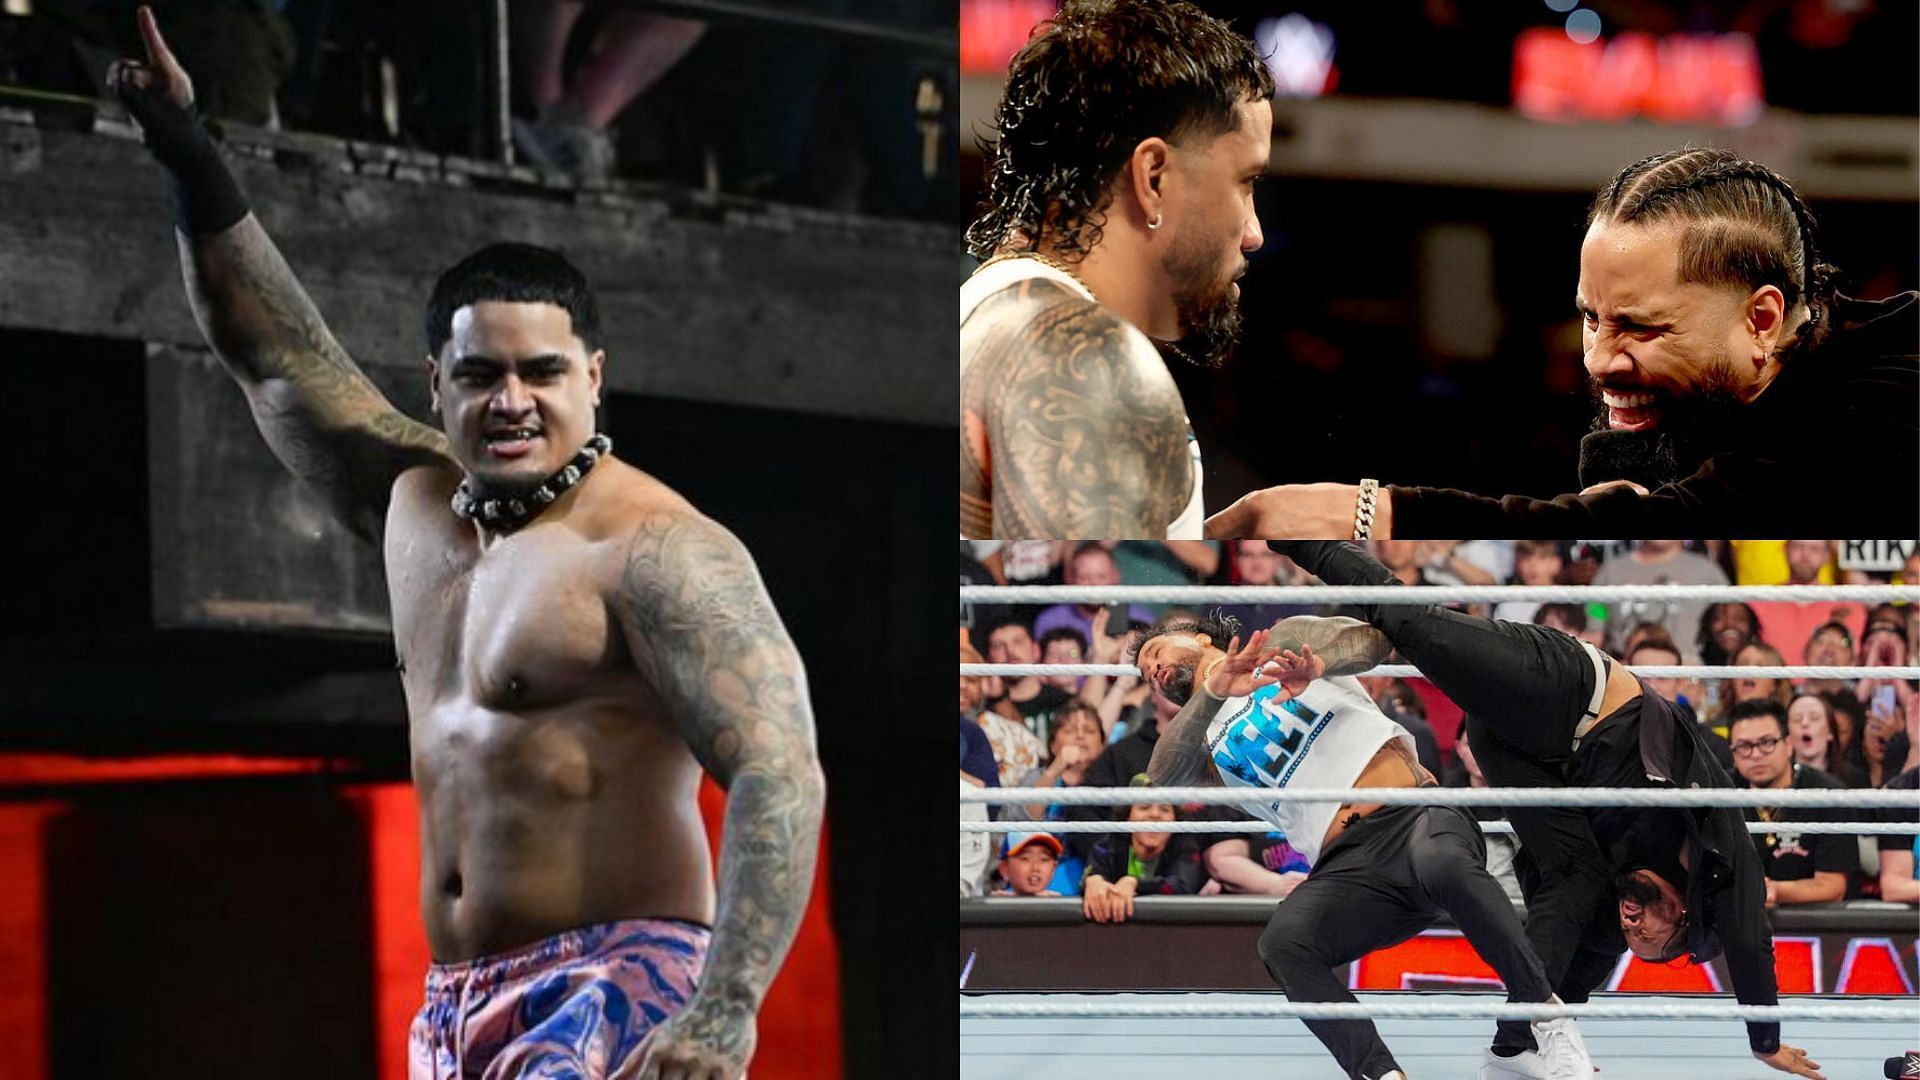 Zilla Fatu is excited for The Usos to cross paths at WrestleMania [Photo Credits: Zilla Fatu Instagram and WWE]